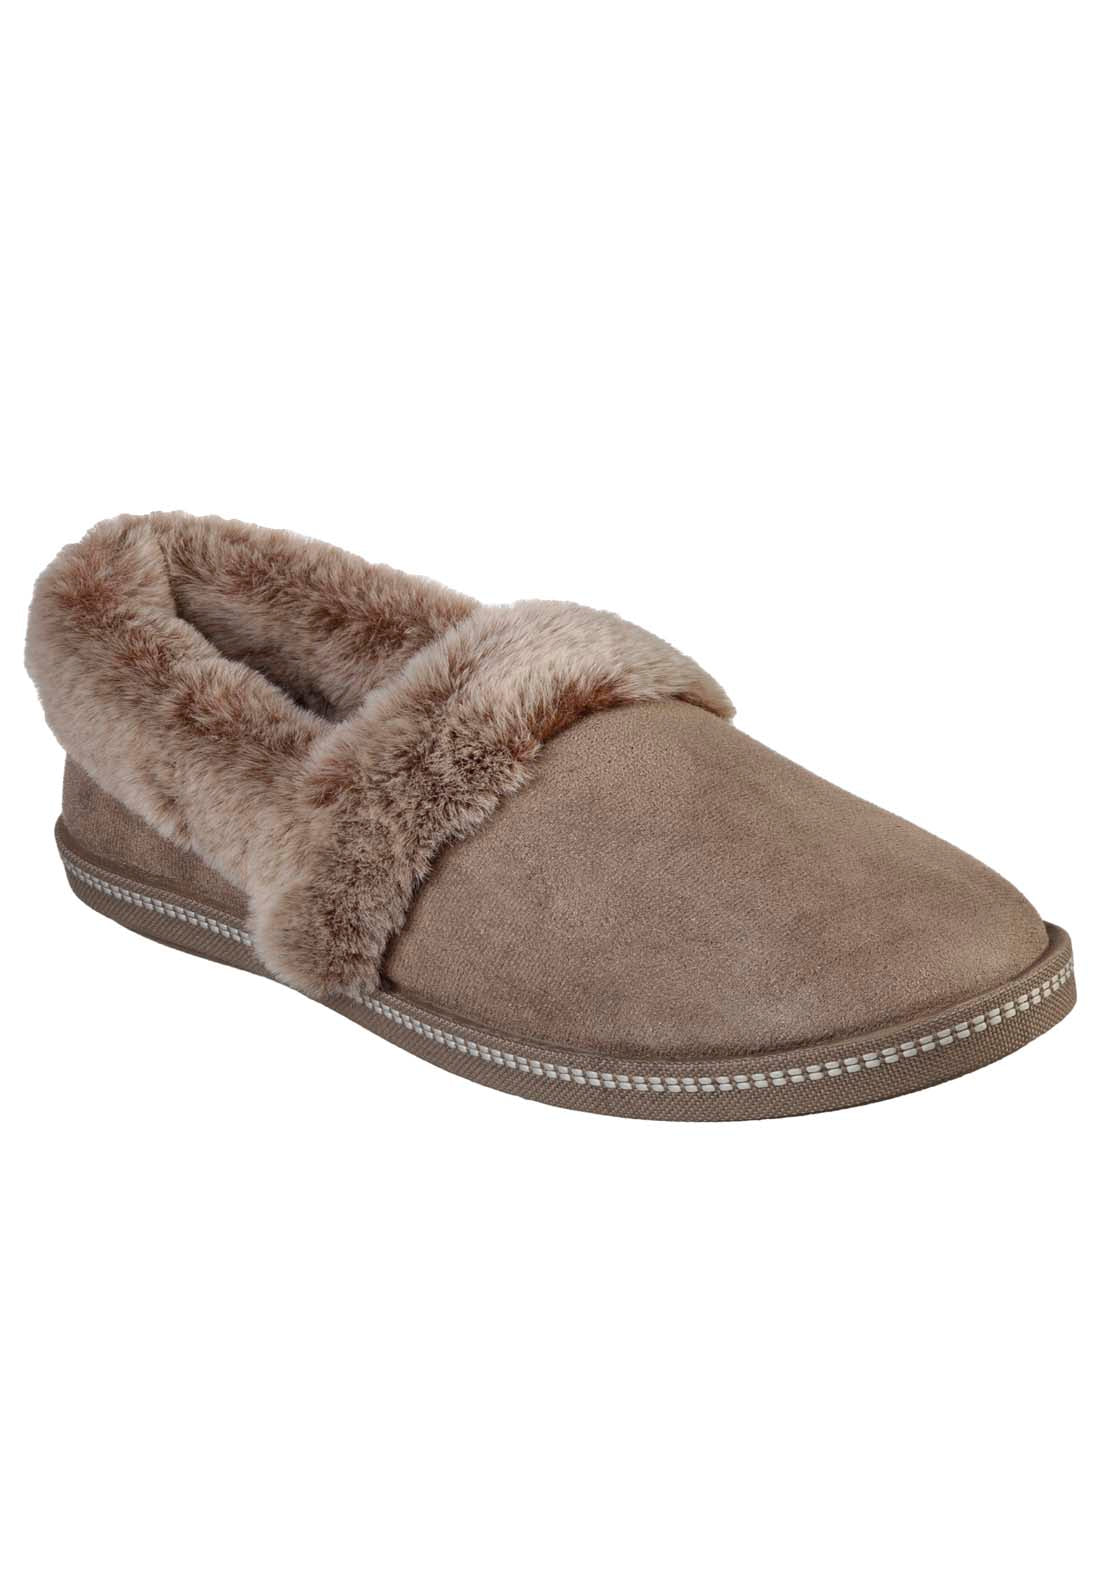 Skechers Cosy Campfire Slipper - Taupe 1 Shaws Department Stores